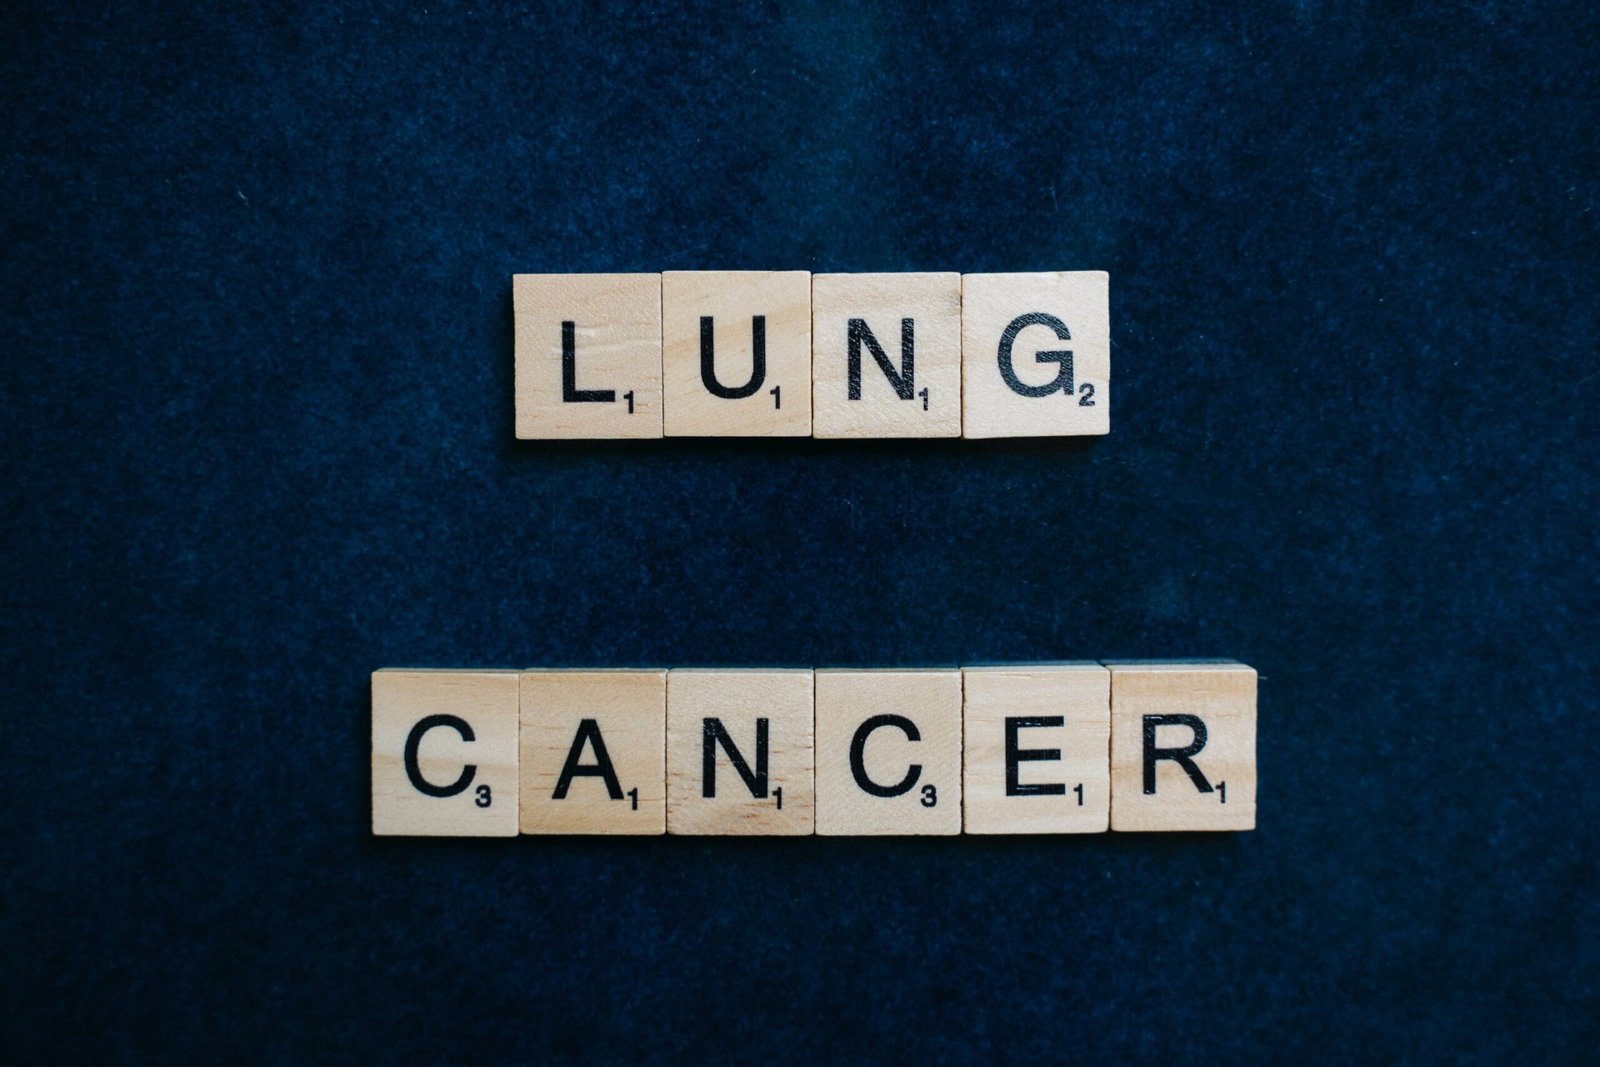 Lung cancer screening found to prolong lives in real-world study